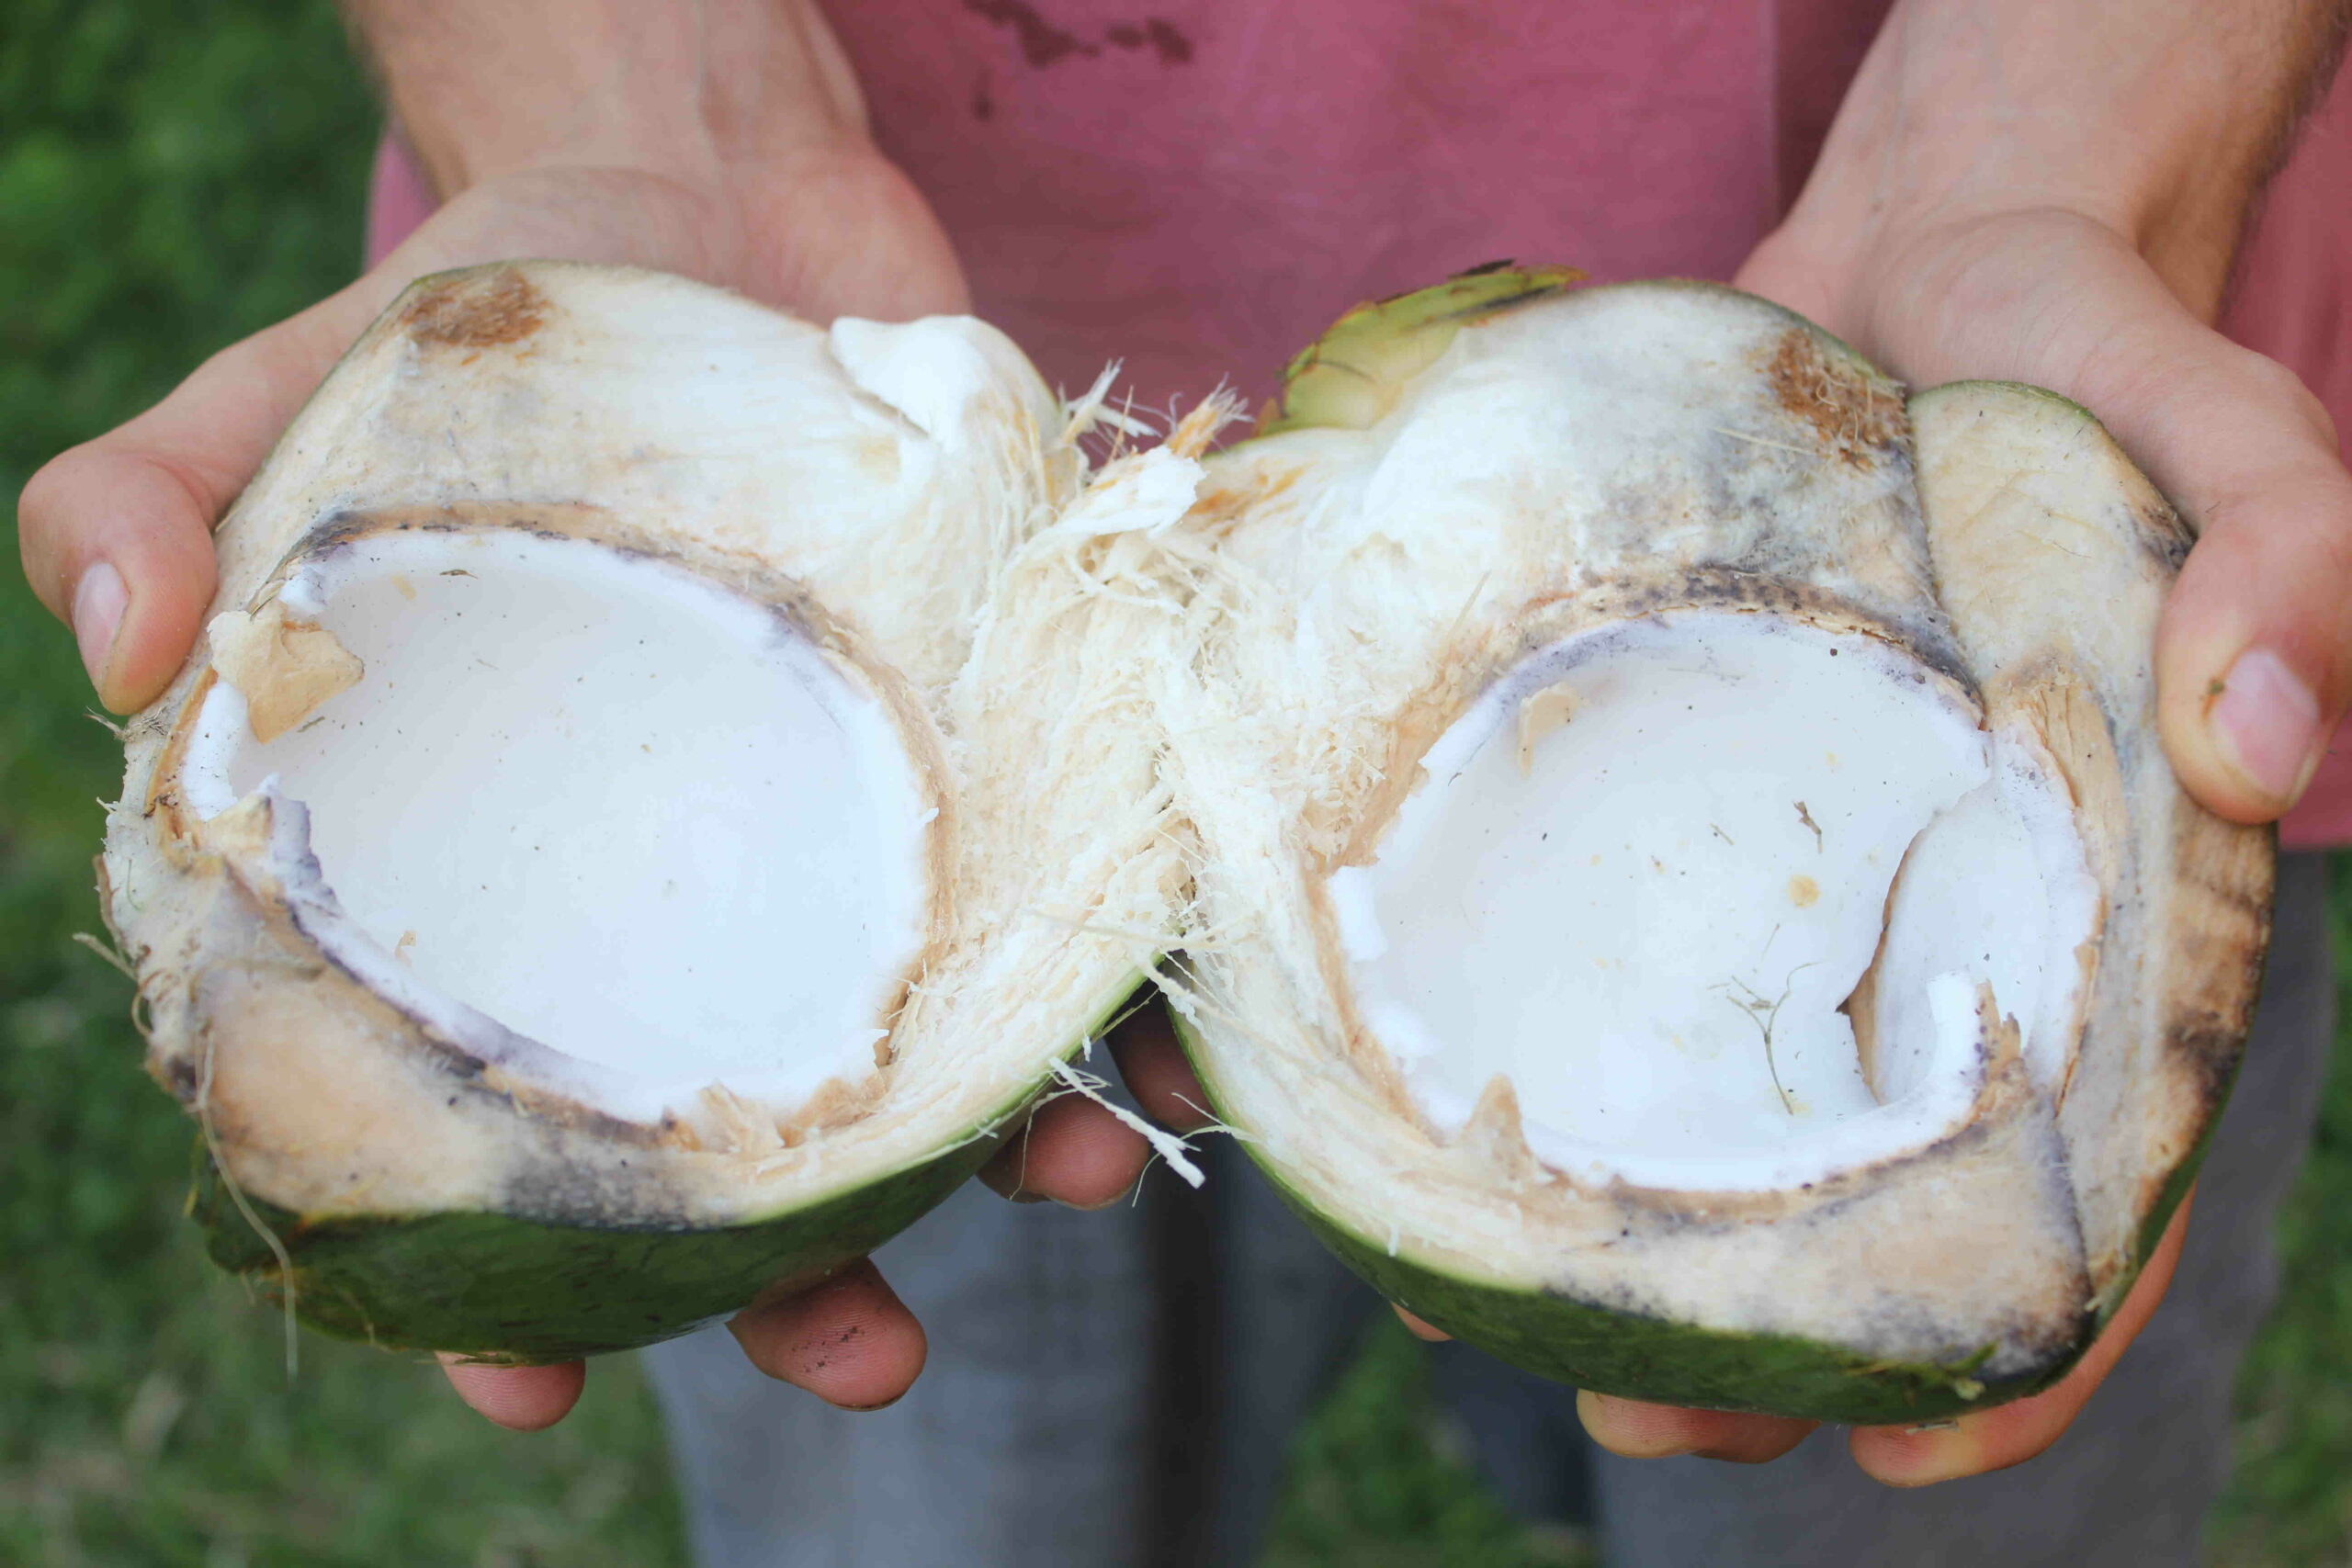 How do you cut a Costa Rican coconut?